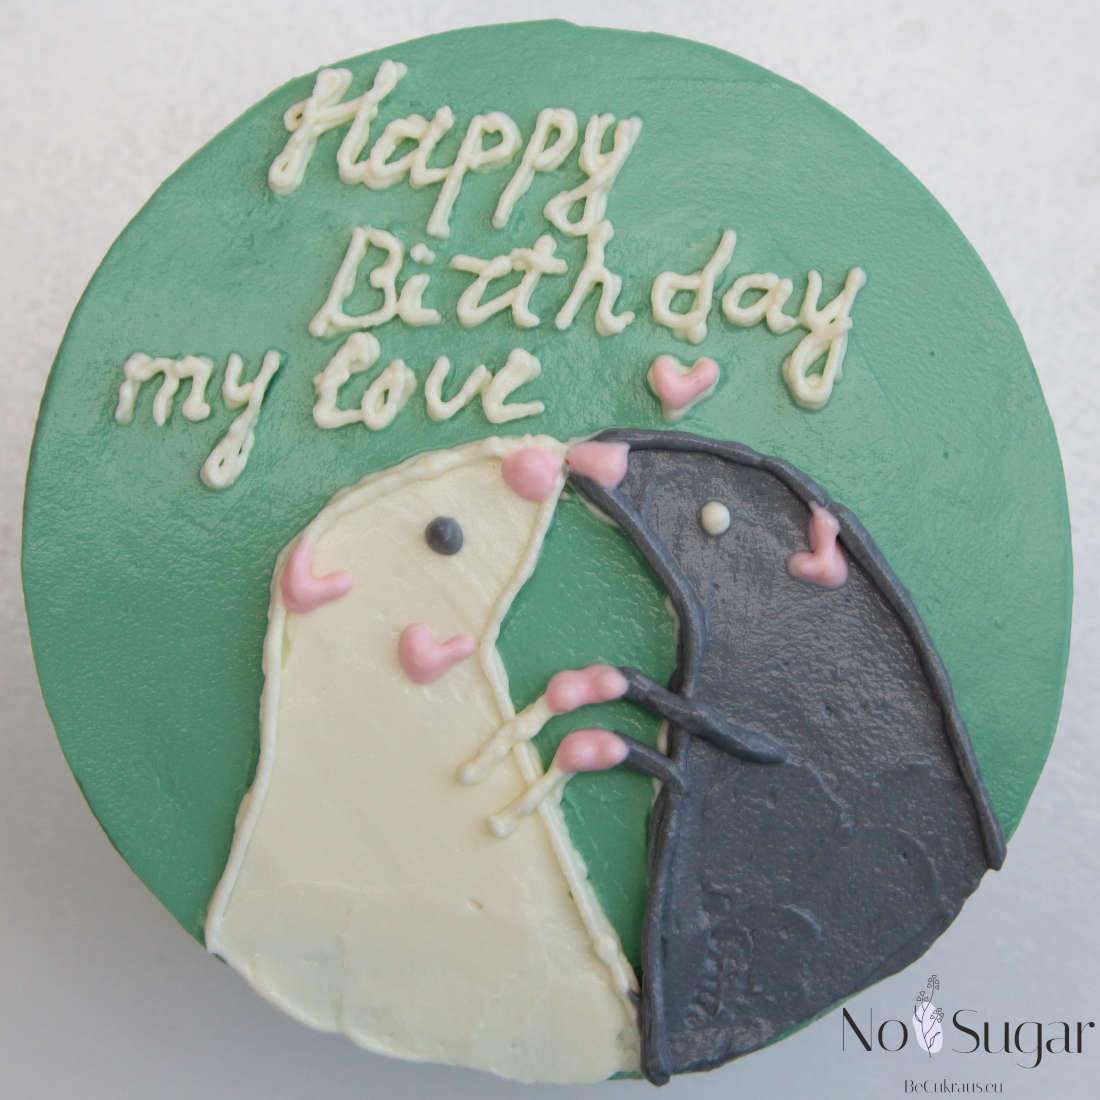 Birthday bento cake for your loved one